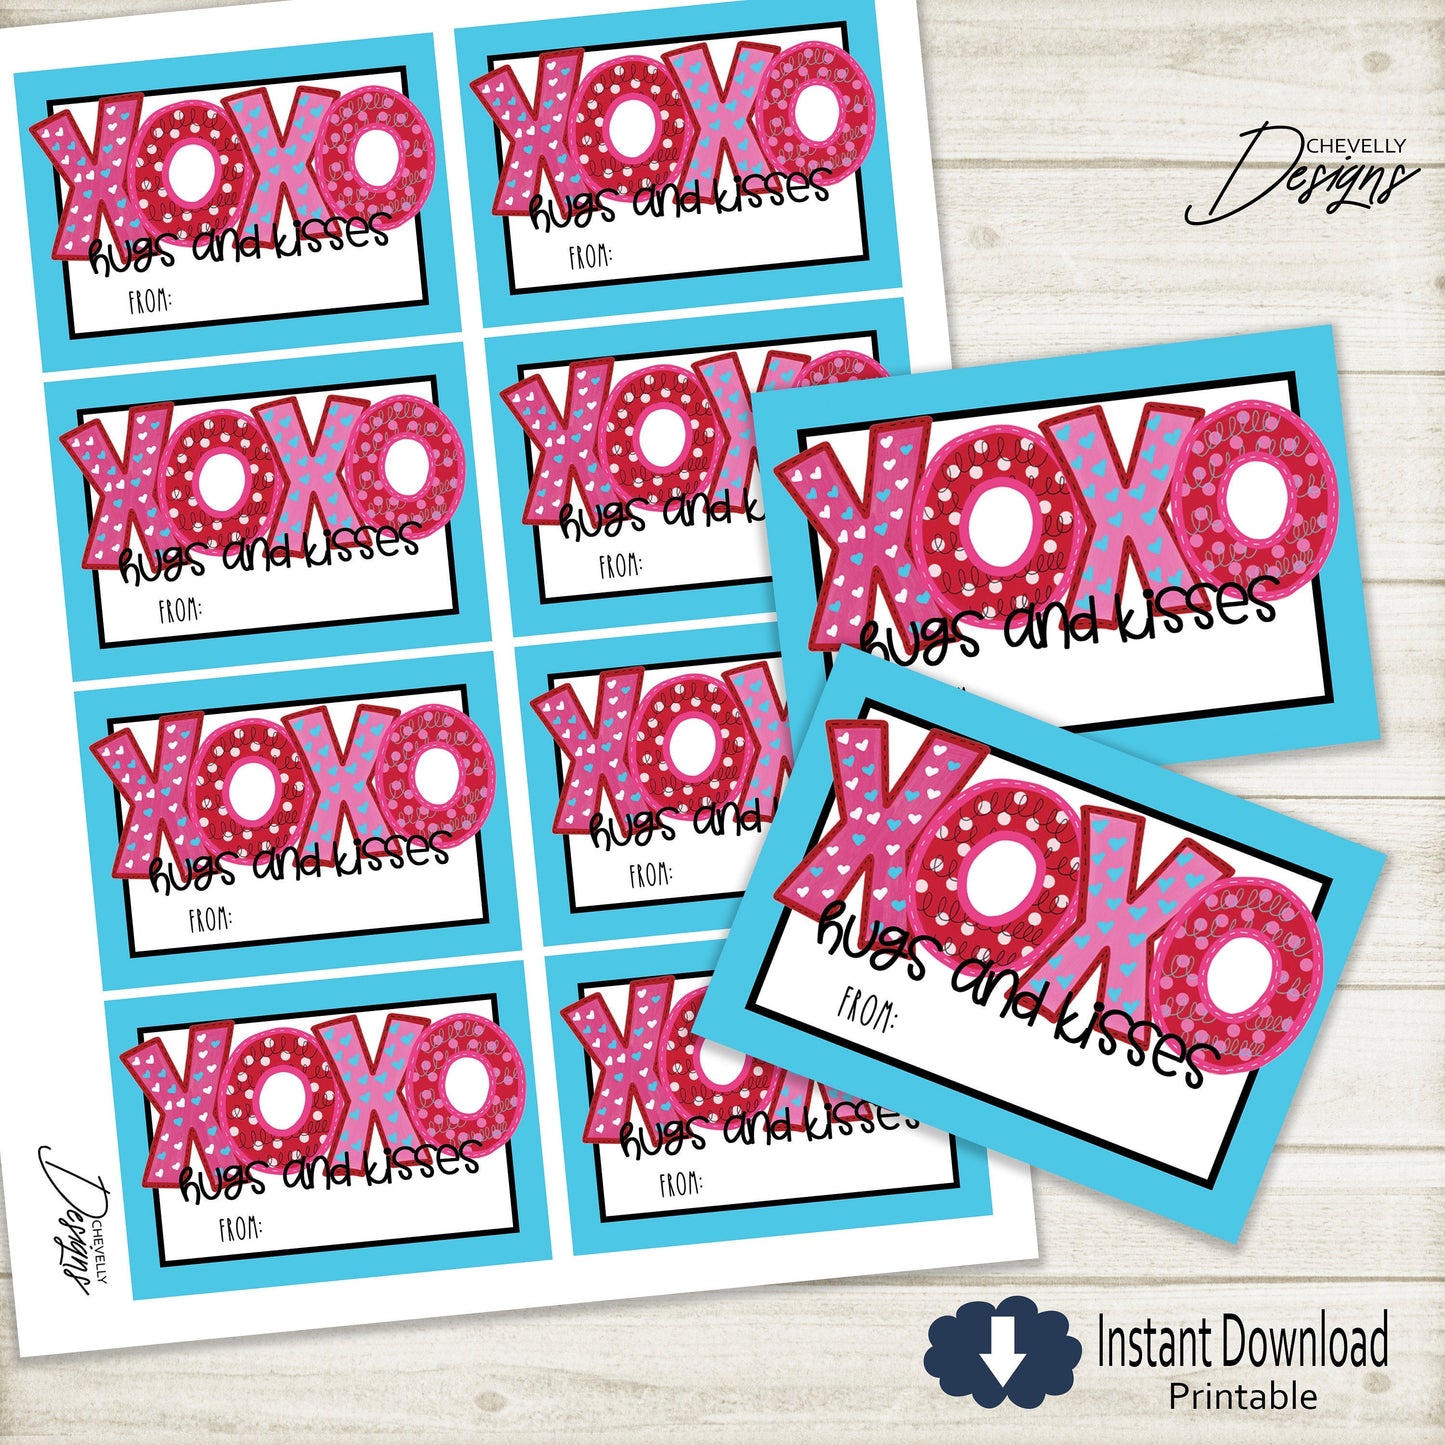 Printable XOXO Valentine Cards - Hugs and Kisses Valentines for Kids >>> Instant Download <<<